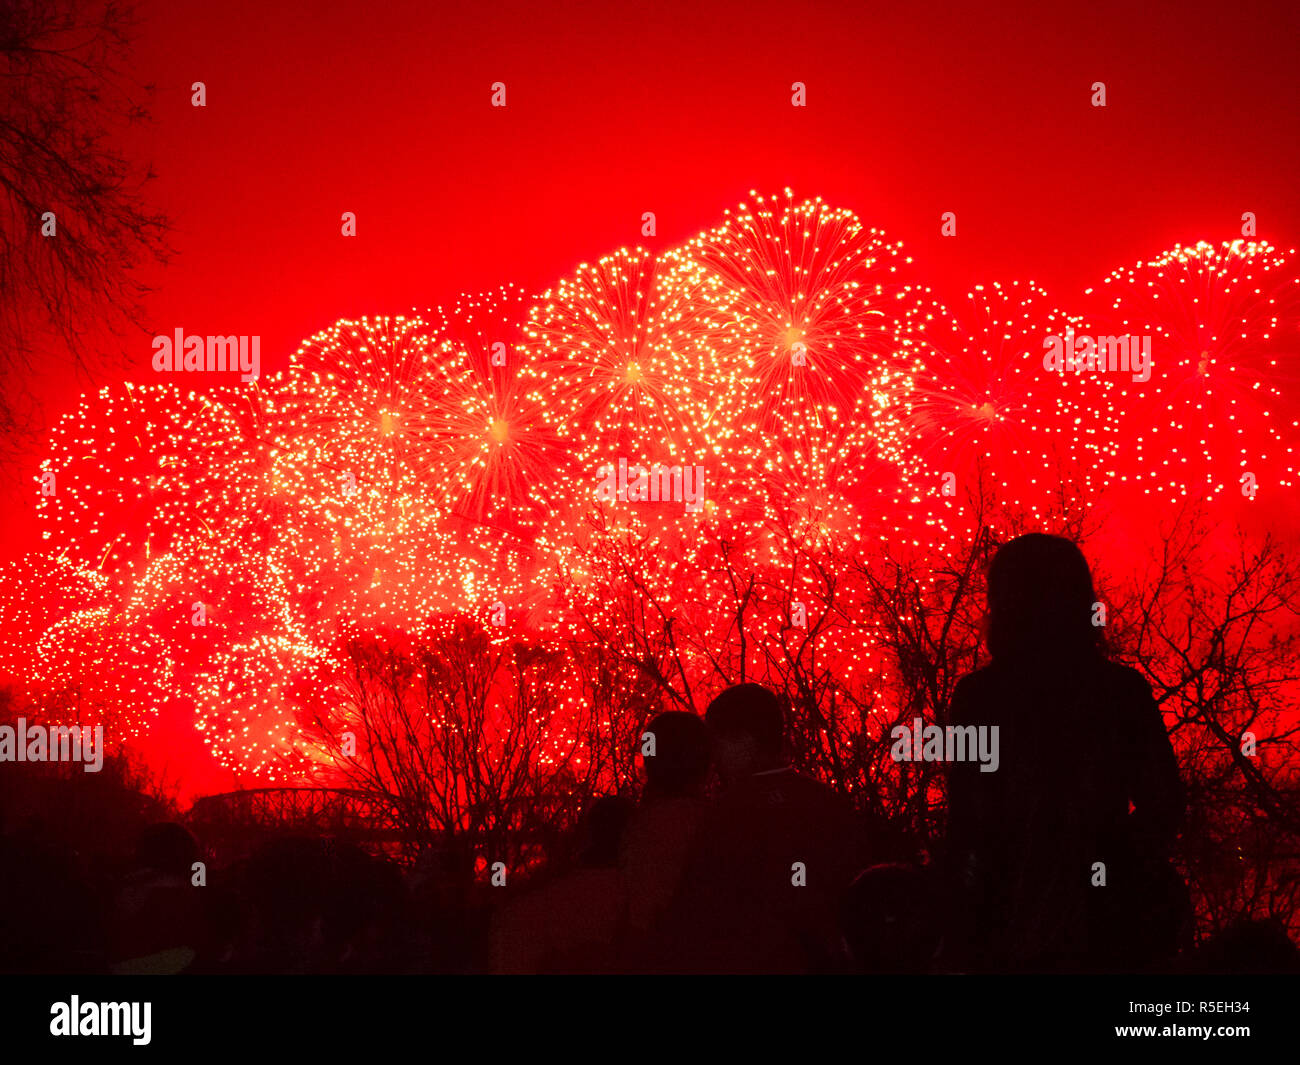 Democratic Peoples's Republic of Korea (DPRK), North Korea, Pyongyang, Fireworks to celebrate the 100th Anniversay of the birth of President Kim Il Sung - April 15th 2012 Stock Photo